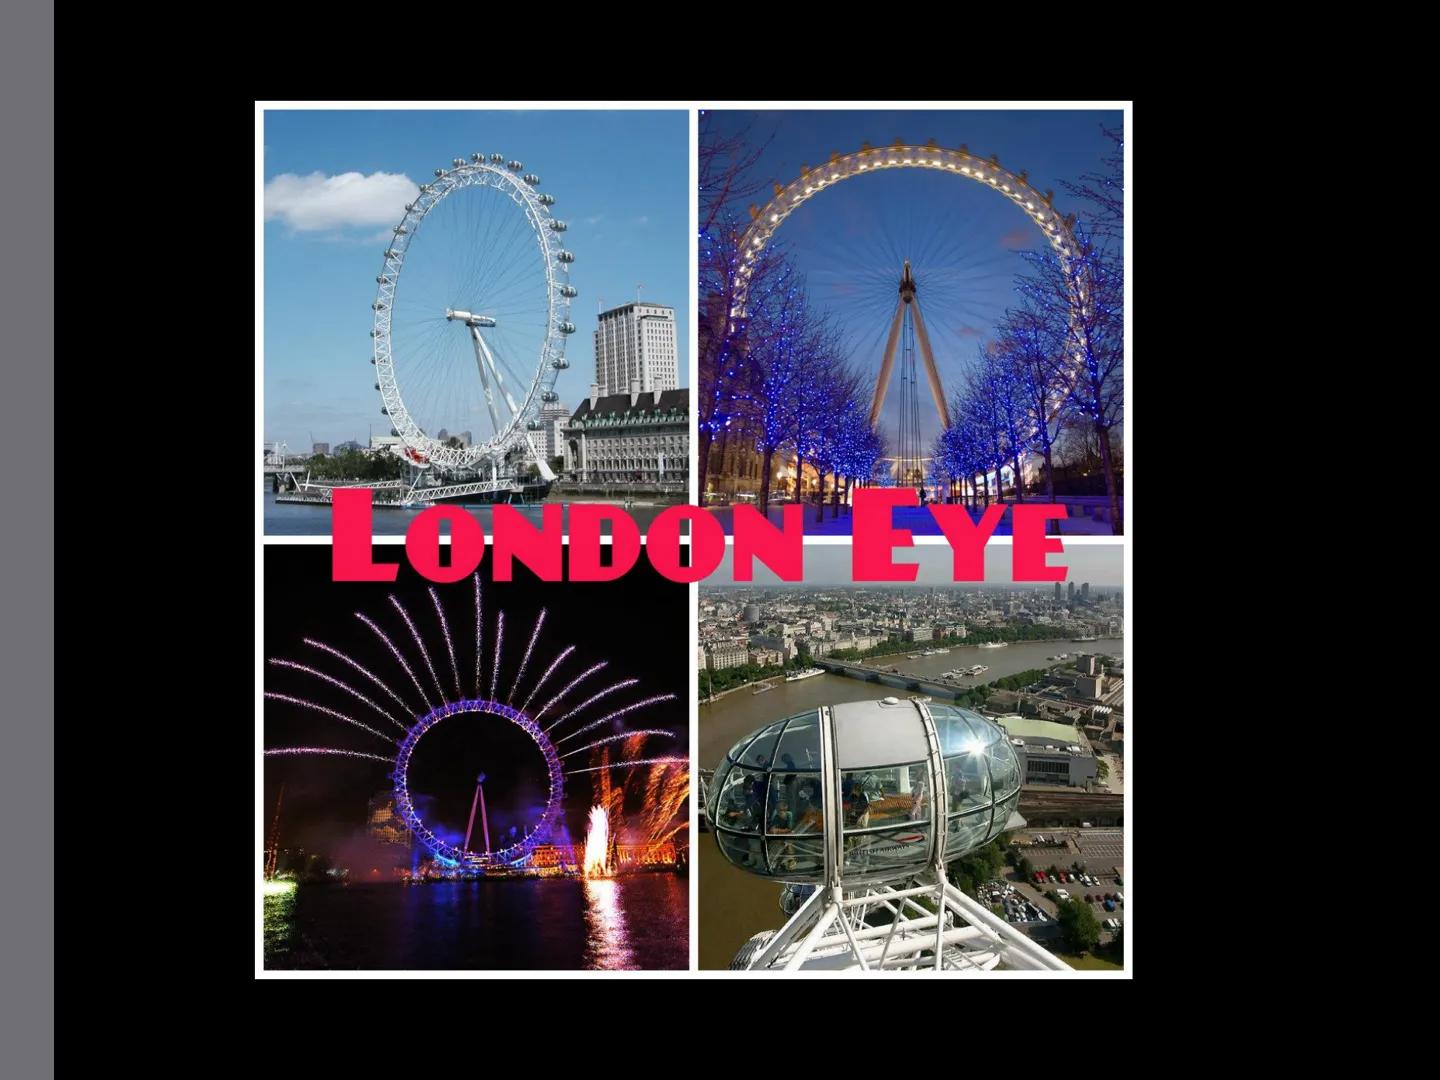 TRAININ
ONDON EYE The London Eye is a giant Ferris
wheel situated on the banks of the River
Thames in London, England. The entire
structure 